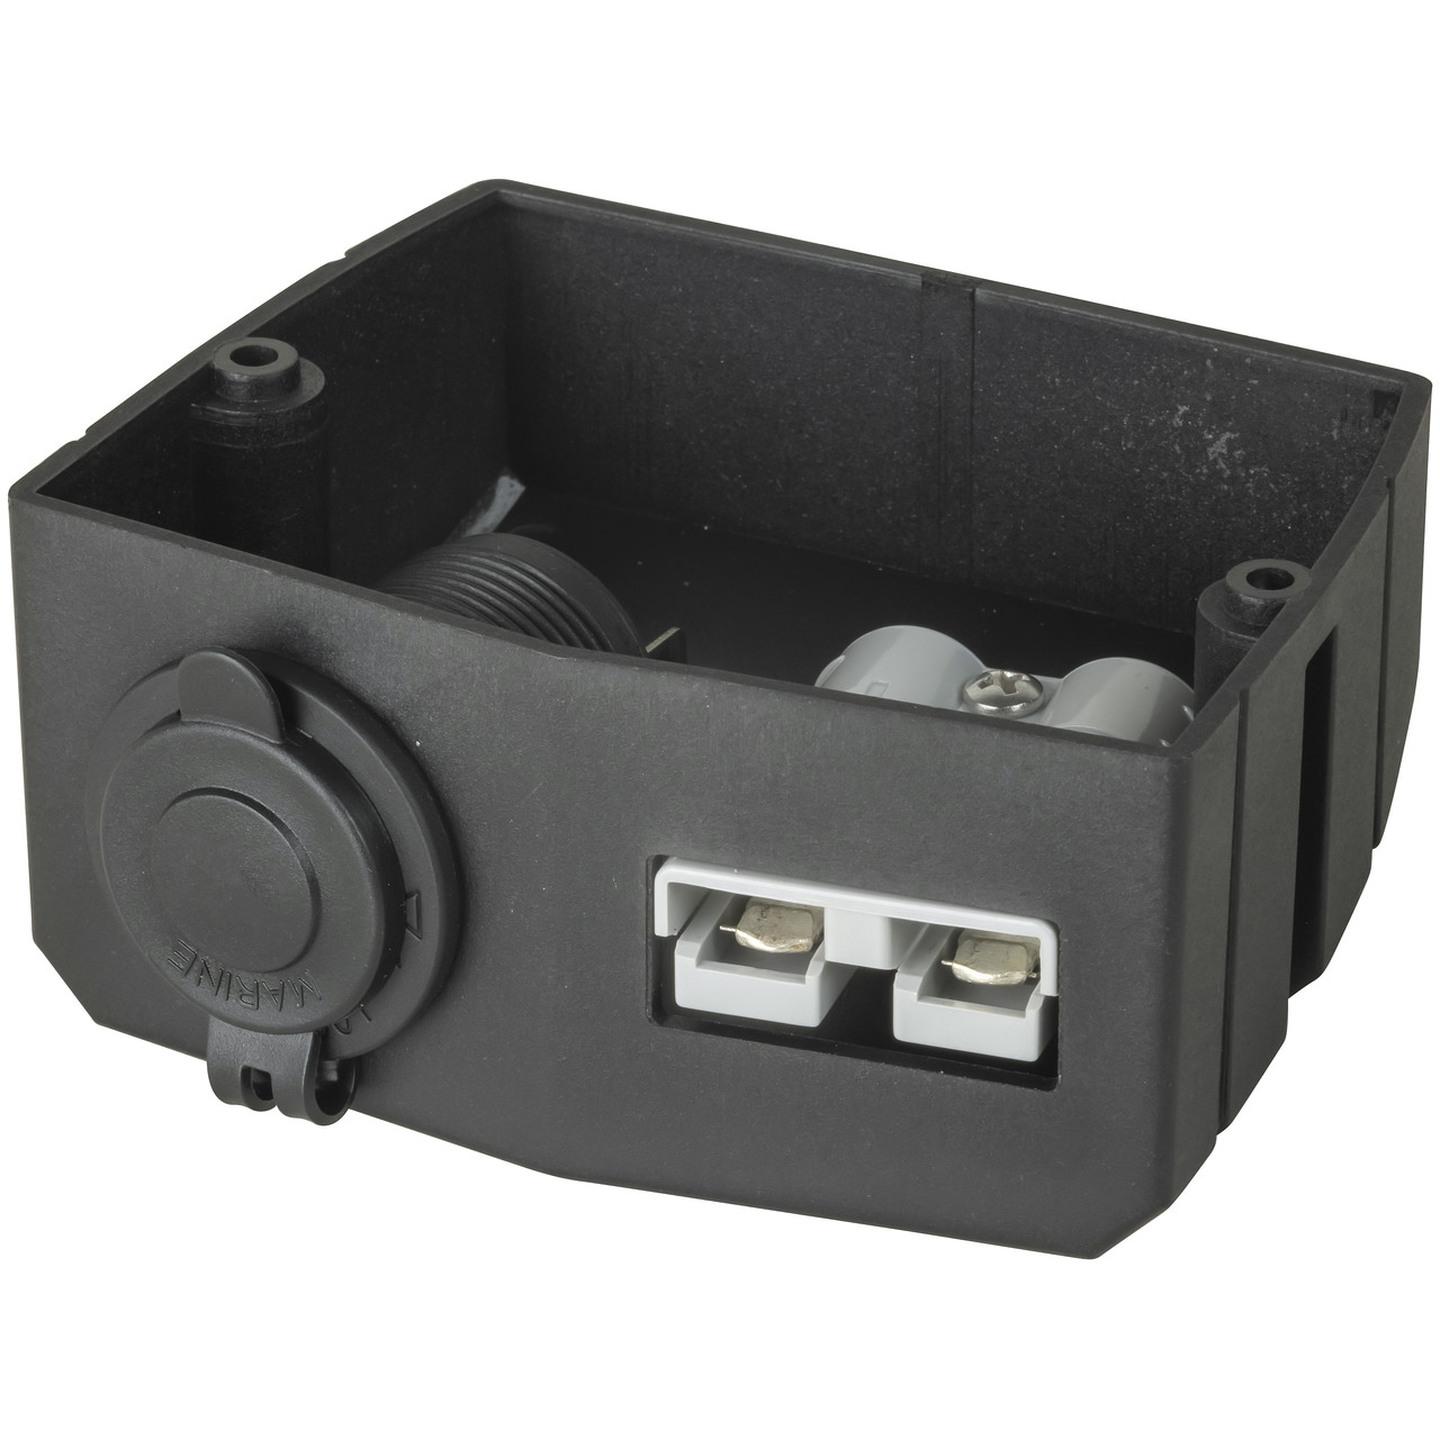 Surface Mount Bracket with 50A Battery Connector and Twin USB Sockets